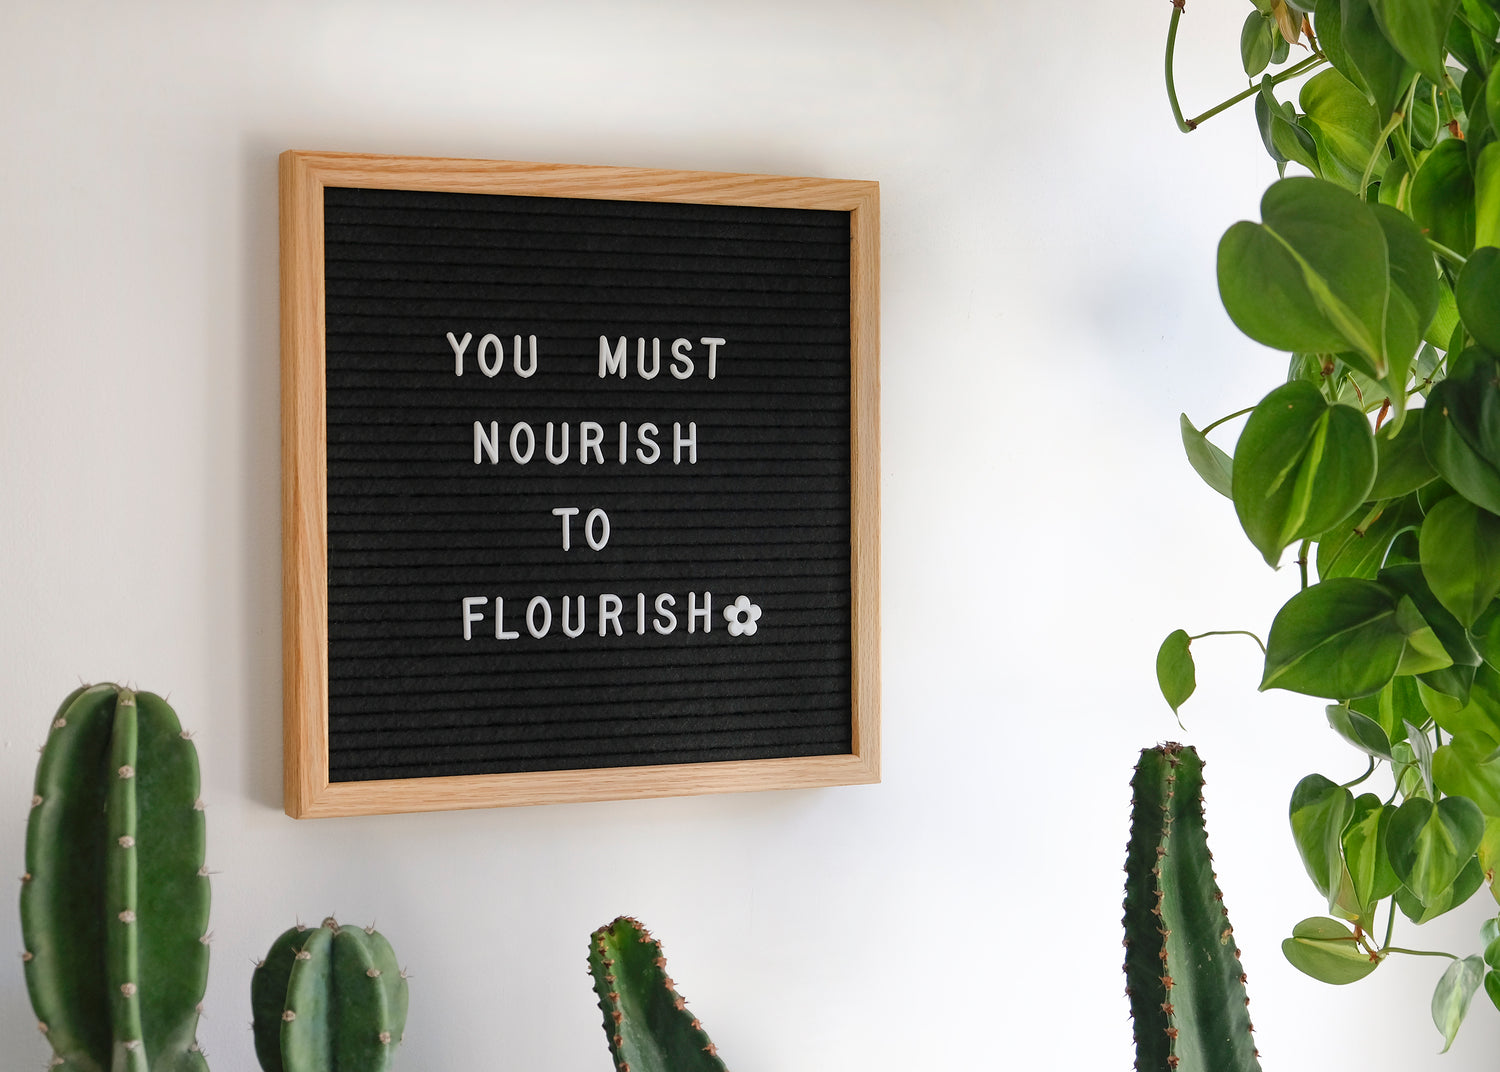 A bulletin board on the wall that says, "You Must Nourish to Flourish" and there are plants around it.